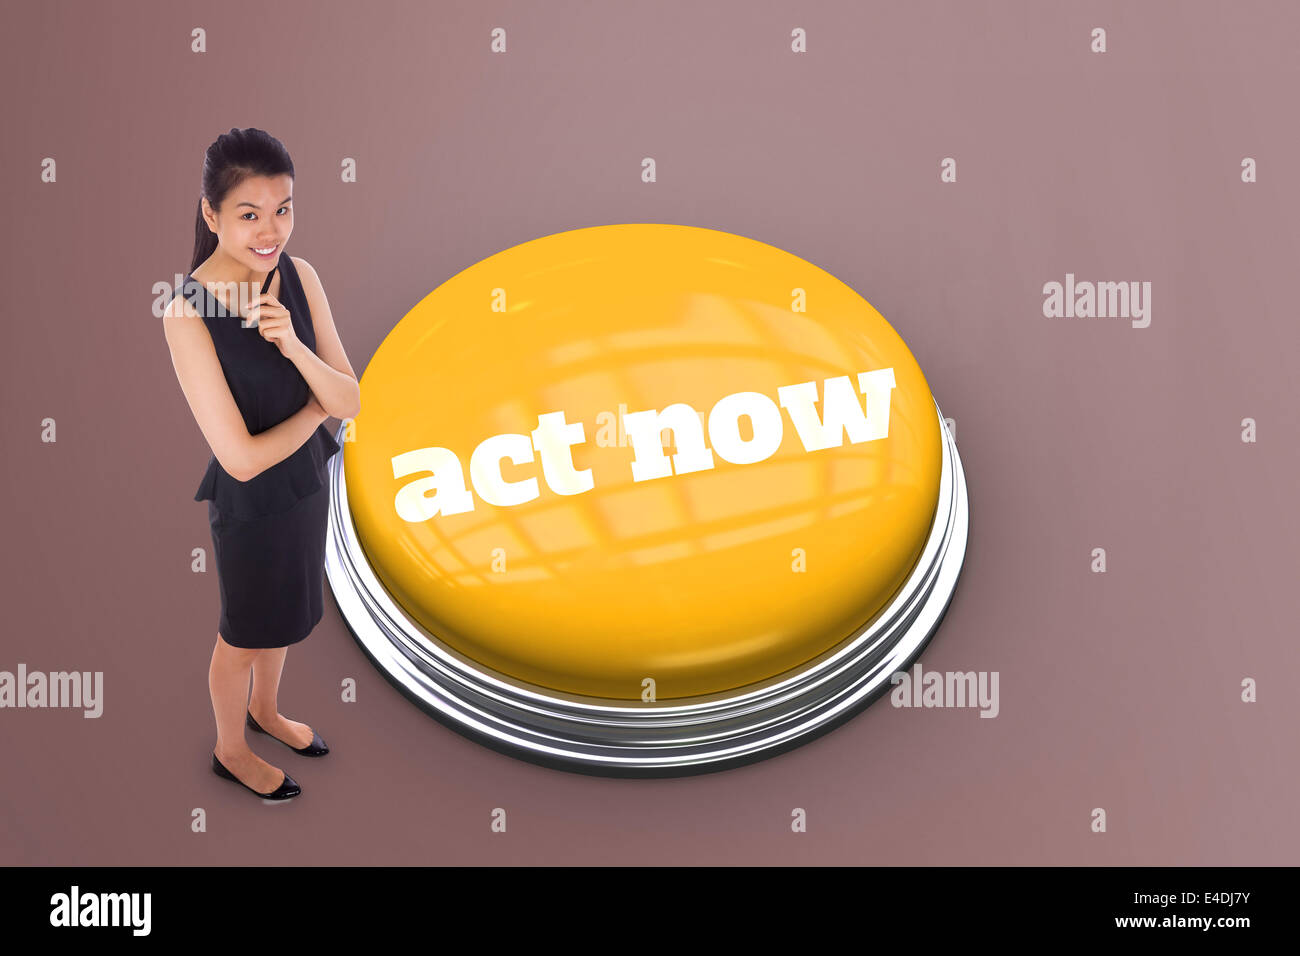 Act now against grey vignette Stock Photo